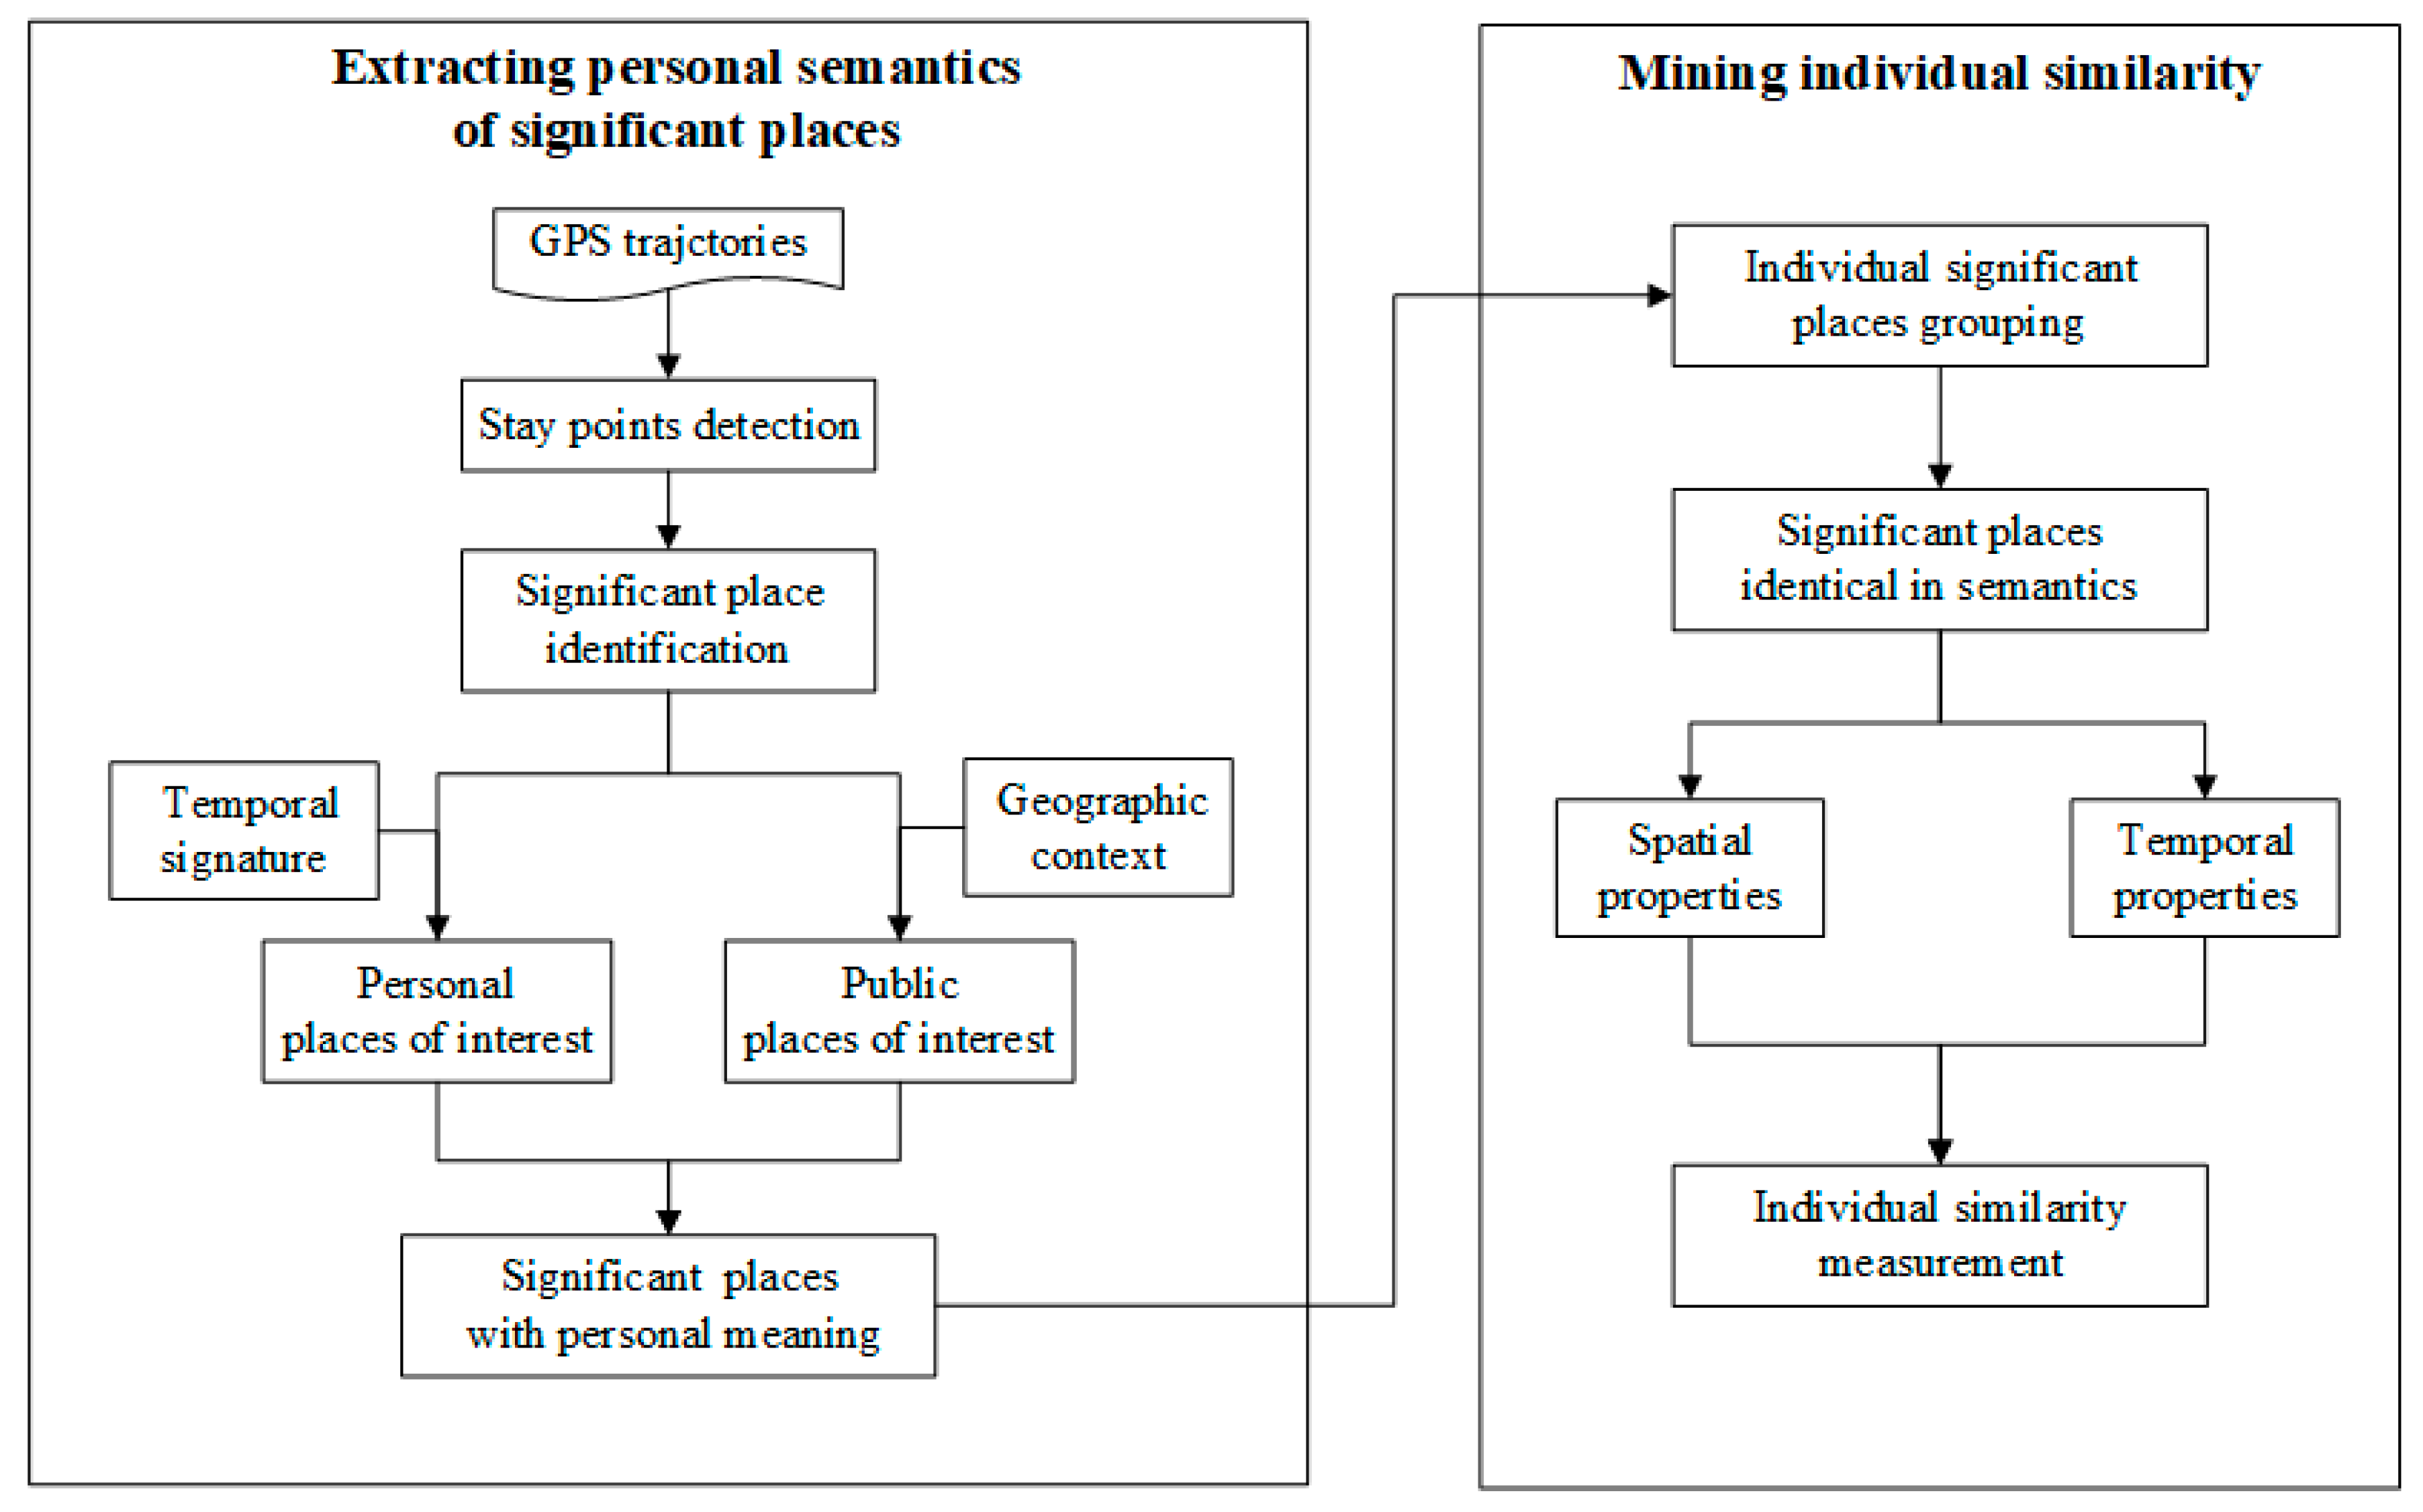 IJGI | Free Full-Text | Mining Individual Similarity by Assessing  Interactions with Personally Significant Places from GPS Trajectories